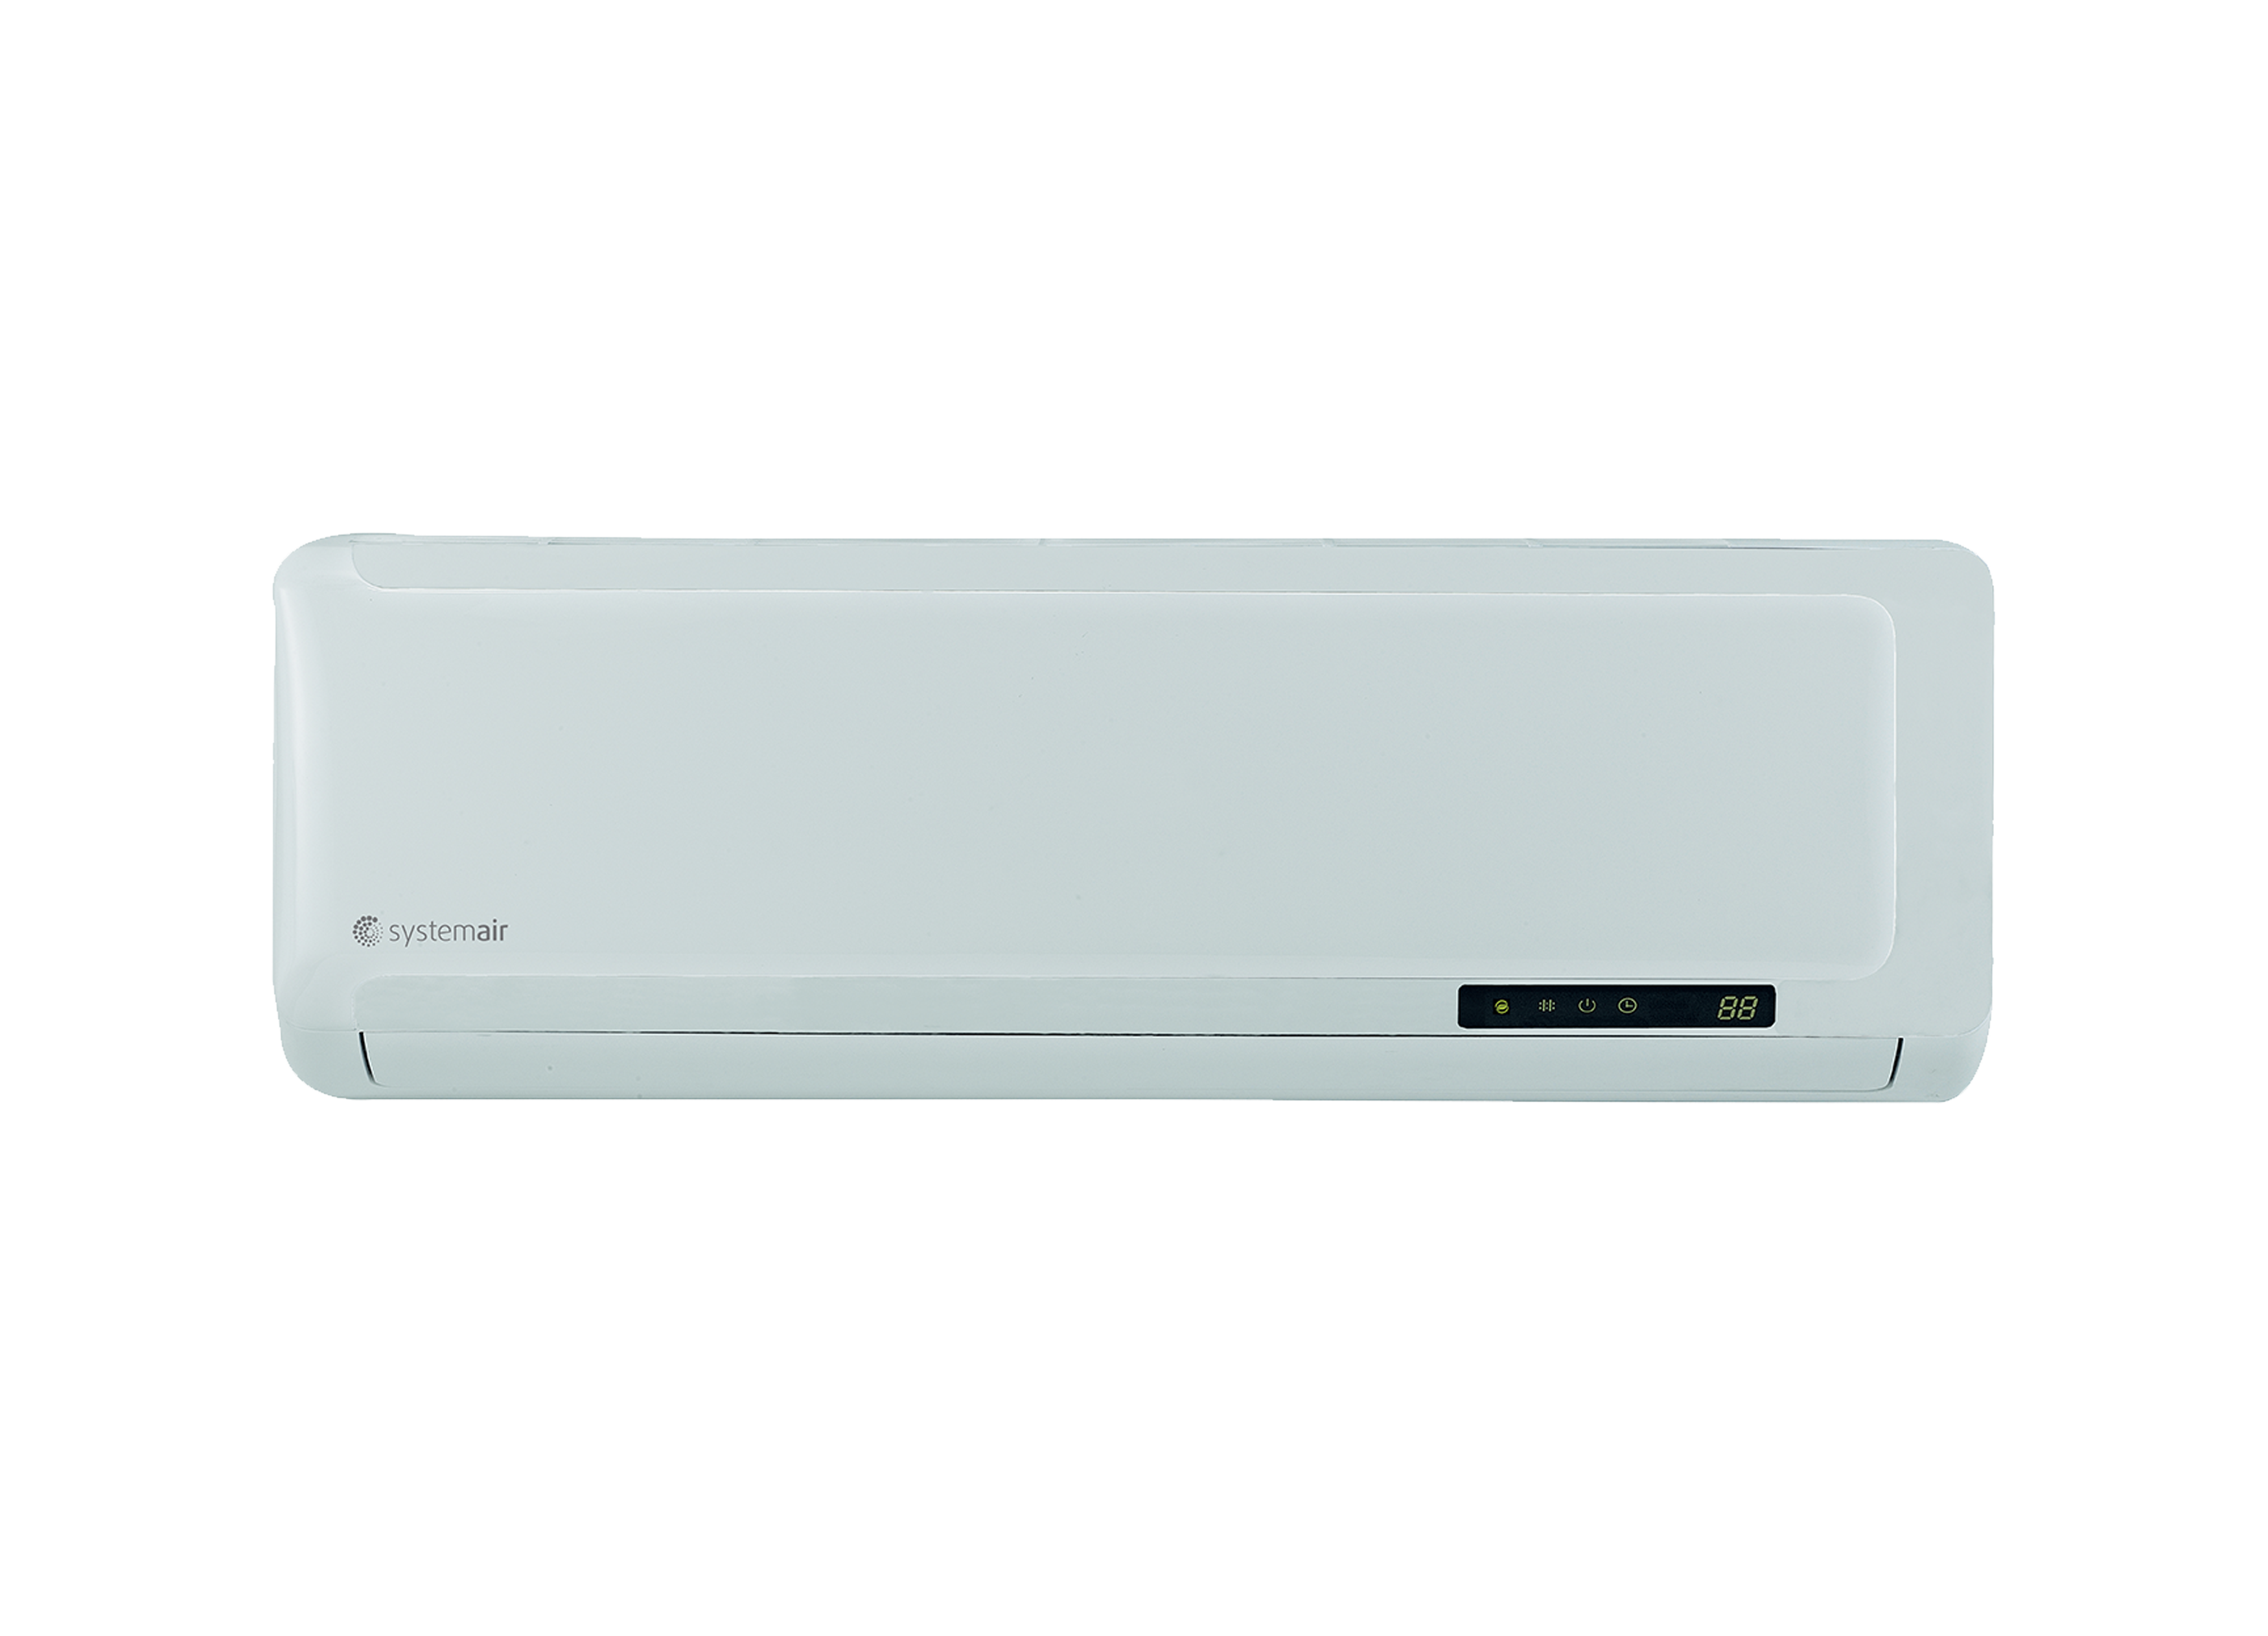 SYSVRF2 WALL - VRF Systems - Air Conditioners - Products - Systemair